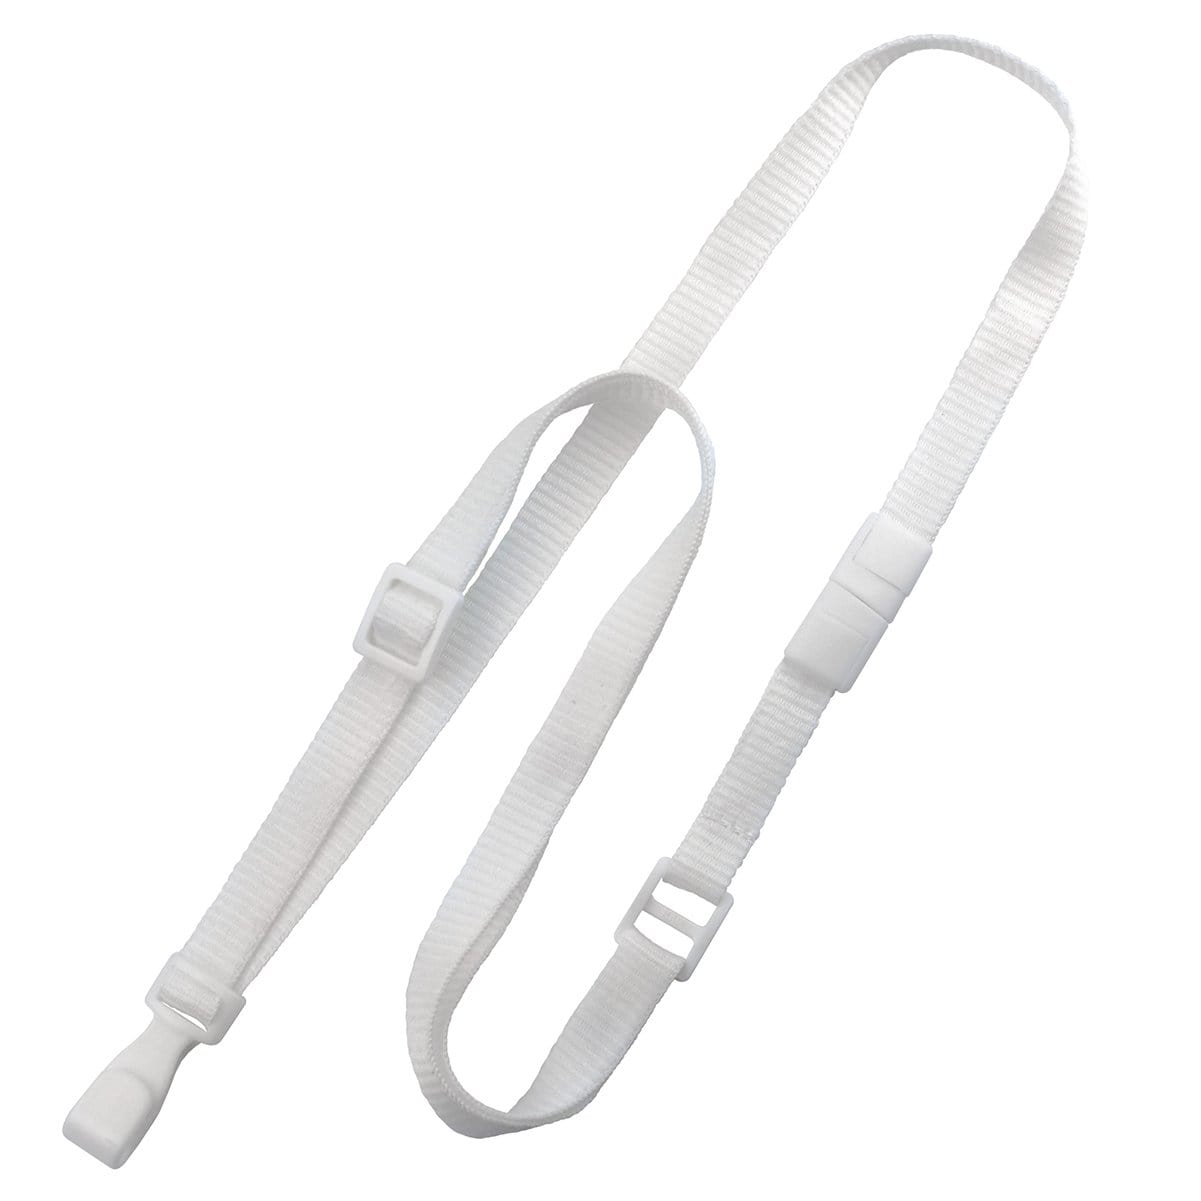 White Adjustable Breakaway Lanyards Great For All SIzes (2137-203X) 2137-2036